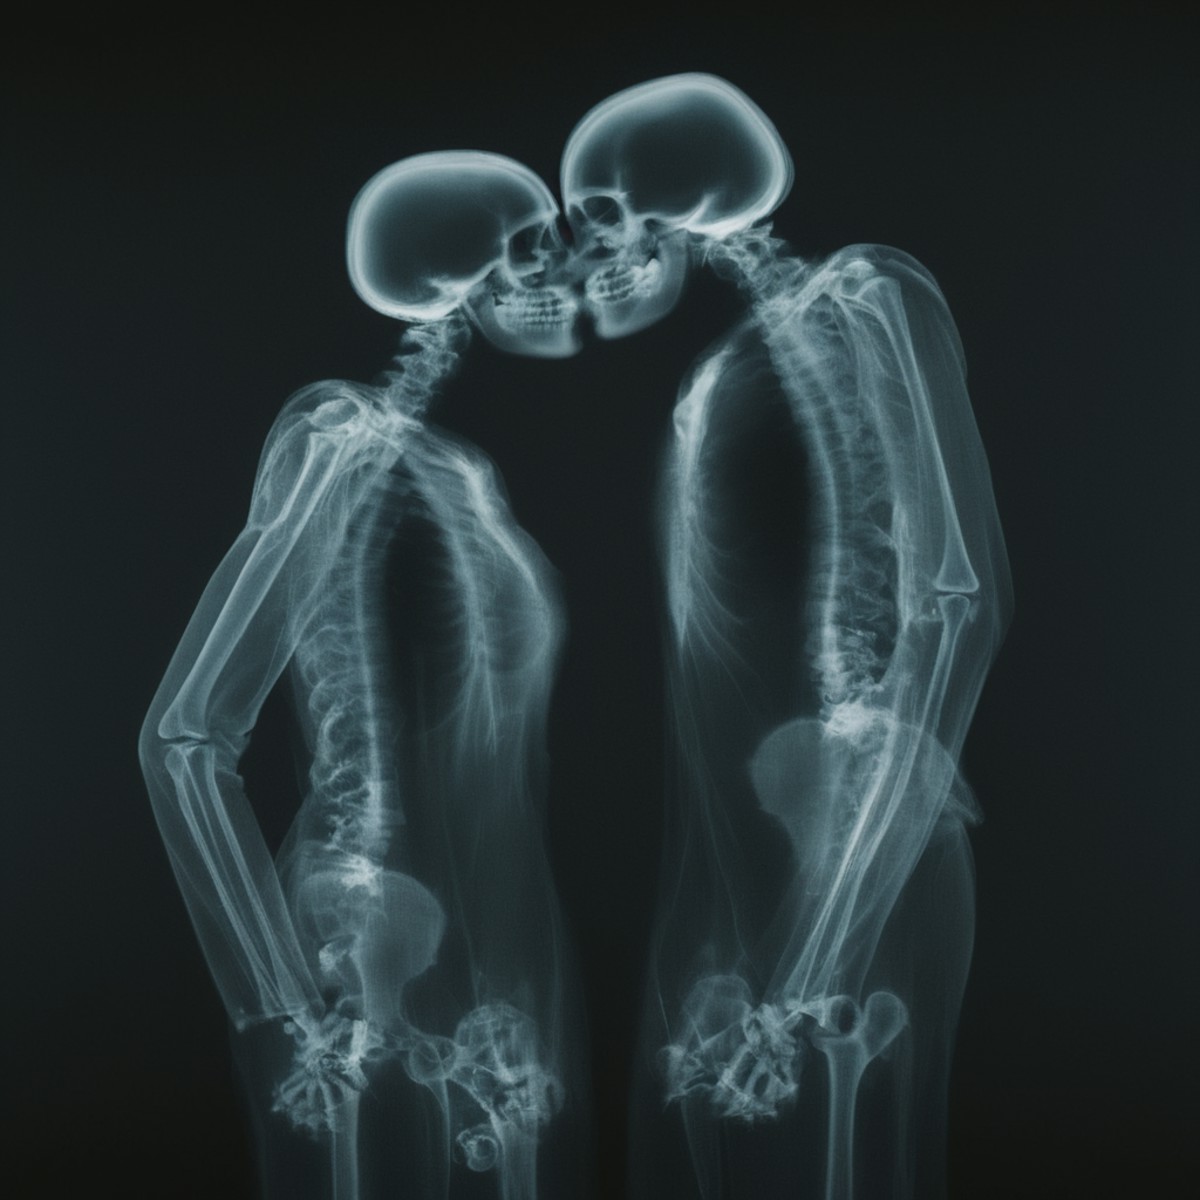 cinematic film still of  <lora:x-ray style:1> X-ray of
a couple of skeletons standing next to each other kissing
,x-ray st...